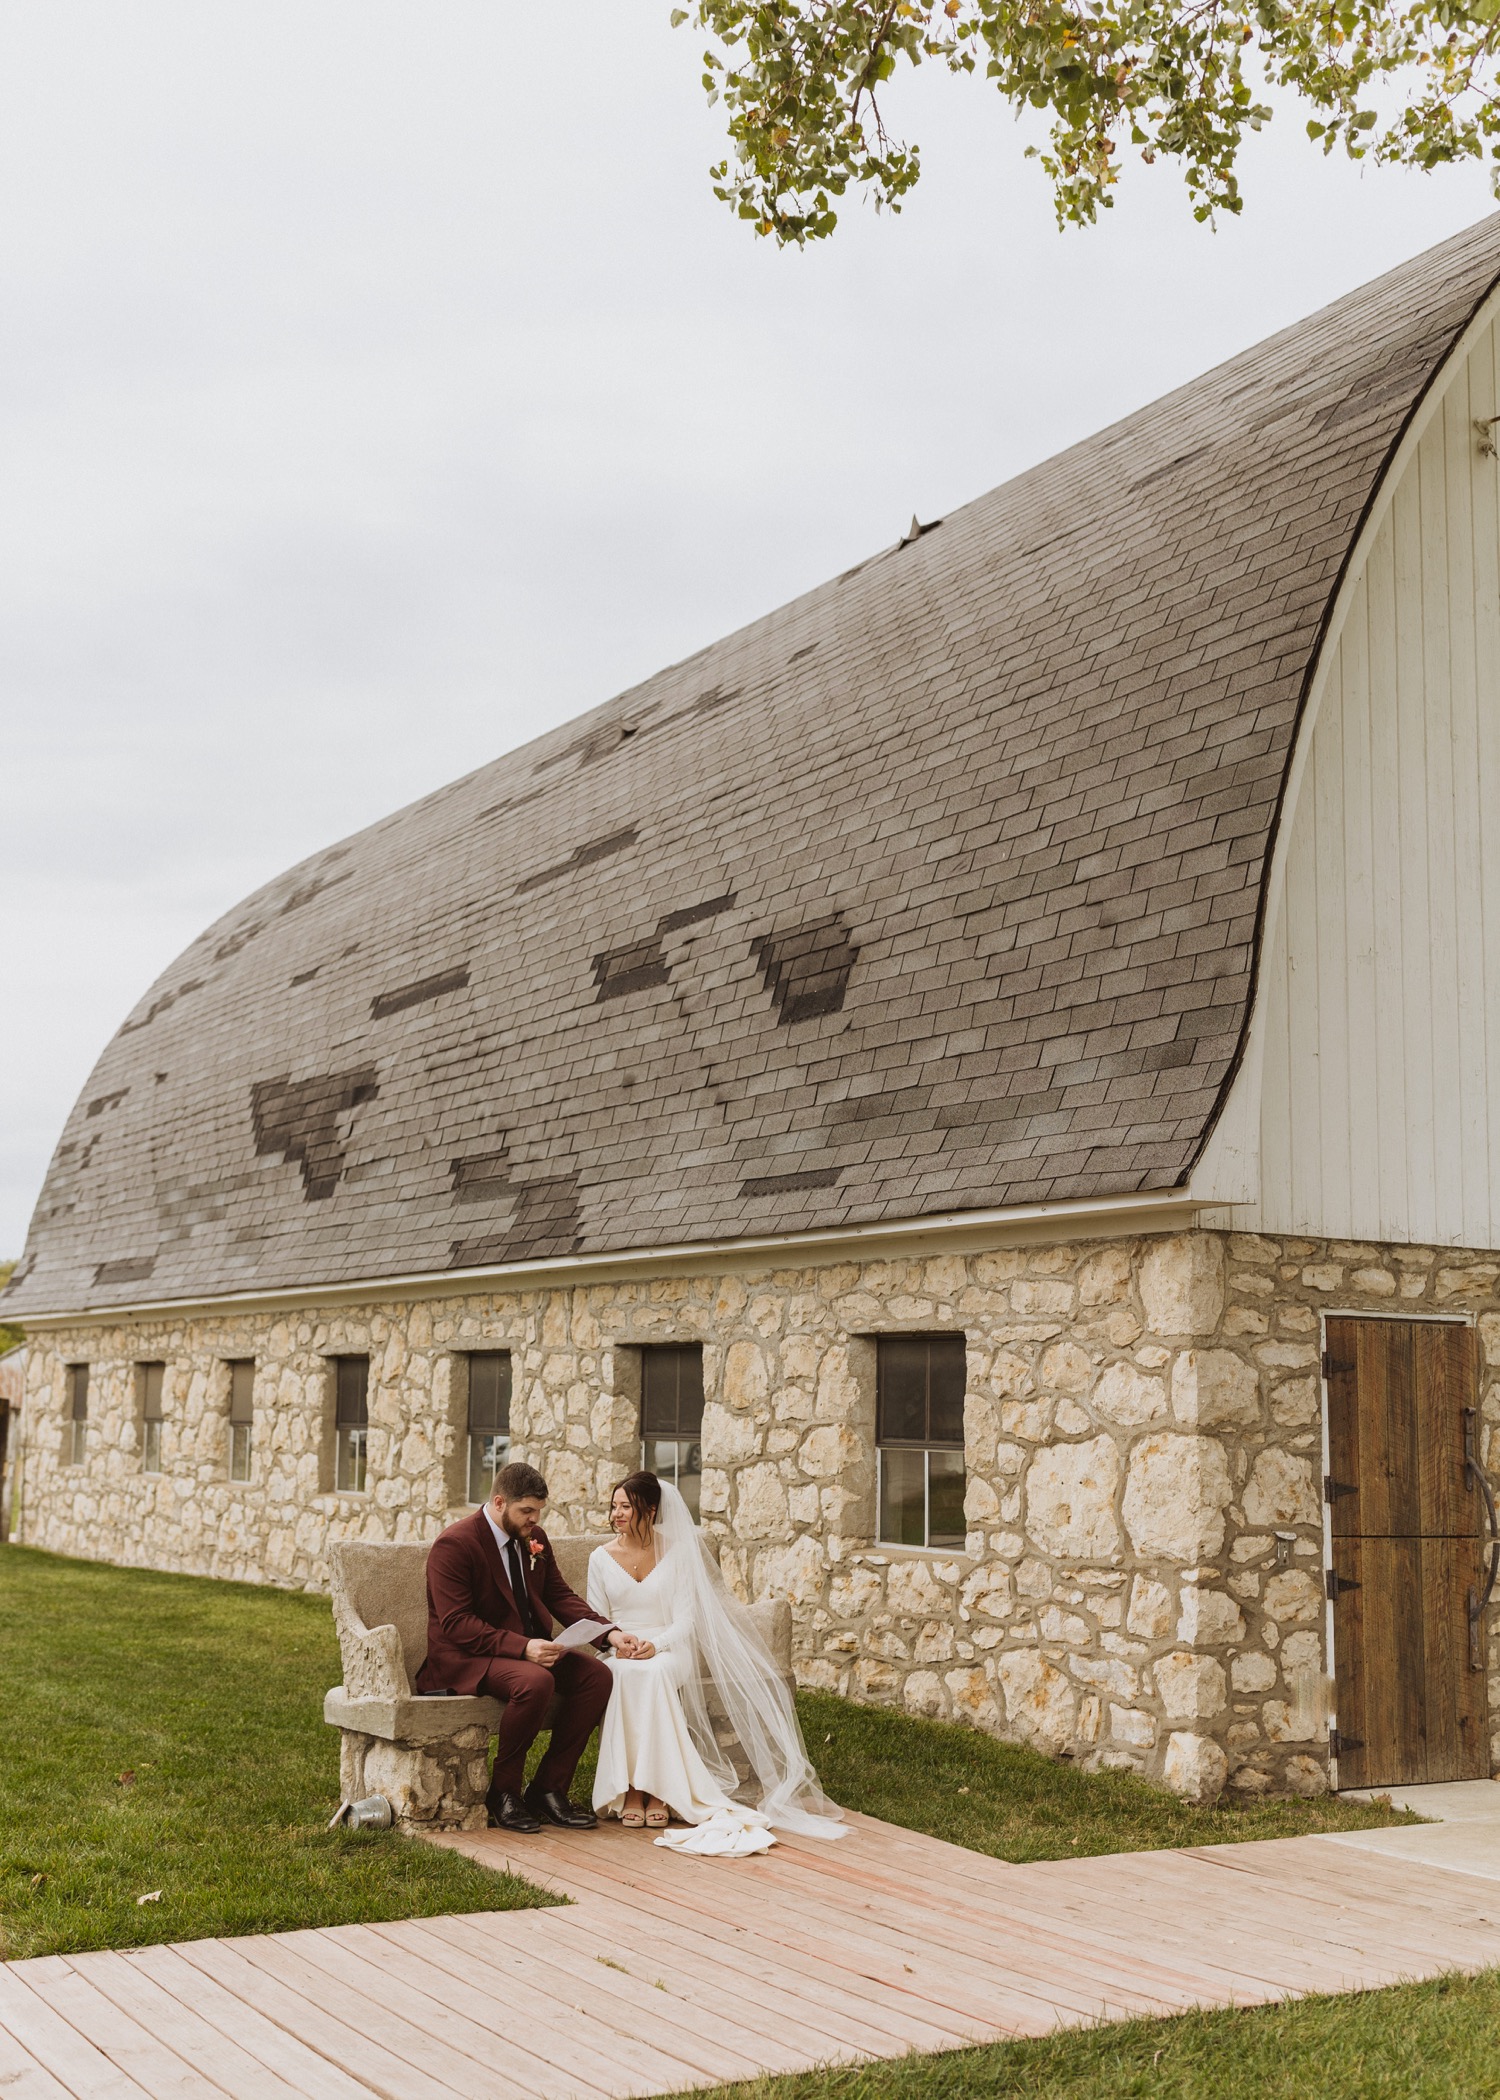 Bride and groom sitting on bench in front of barn, reading notes written to each other